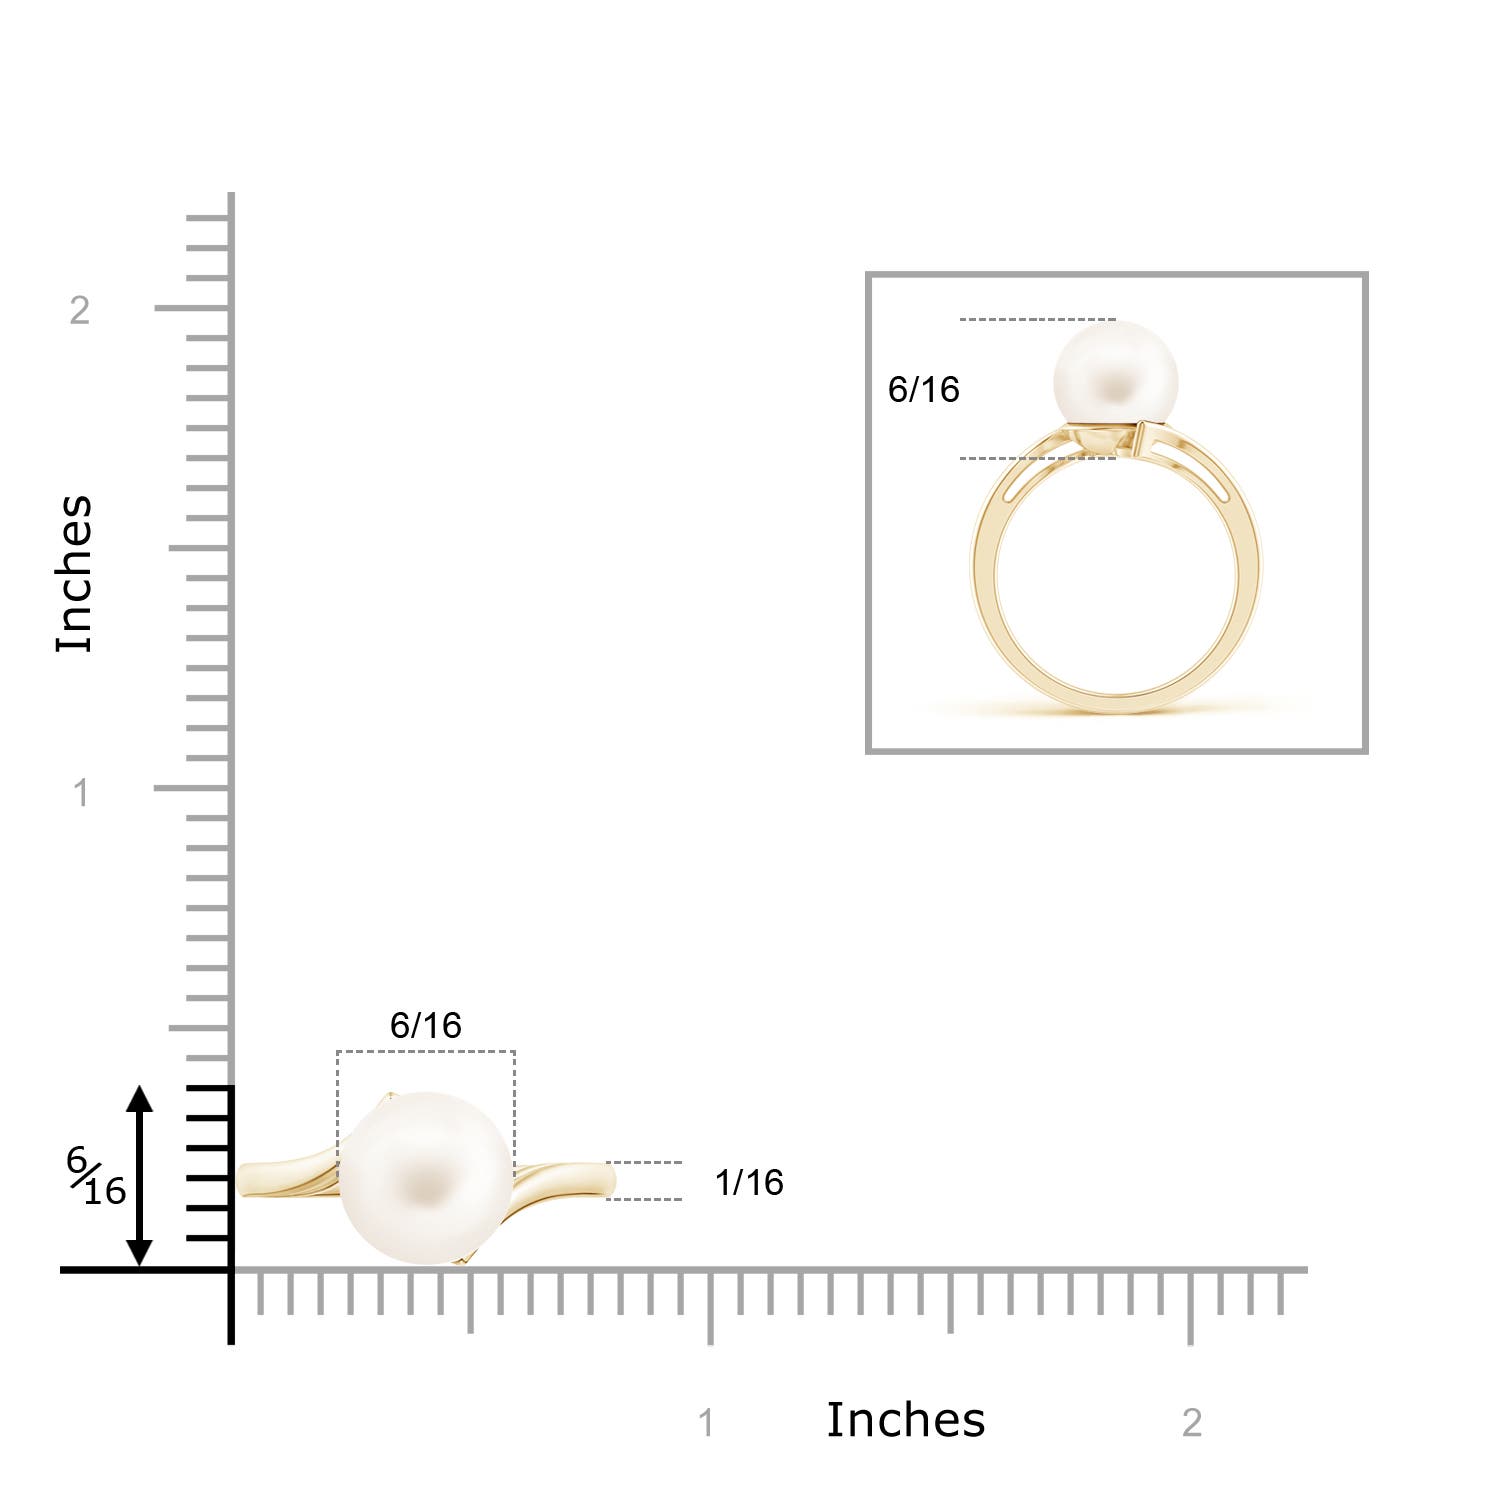 AA / 5.25 CT / 14 KT Yellow Gold